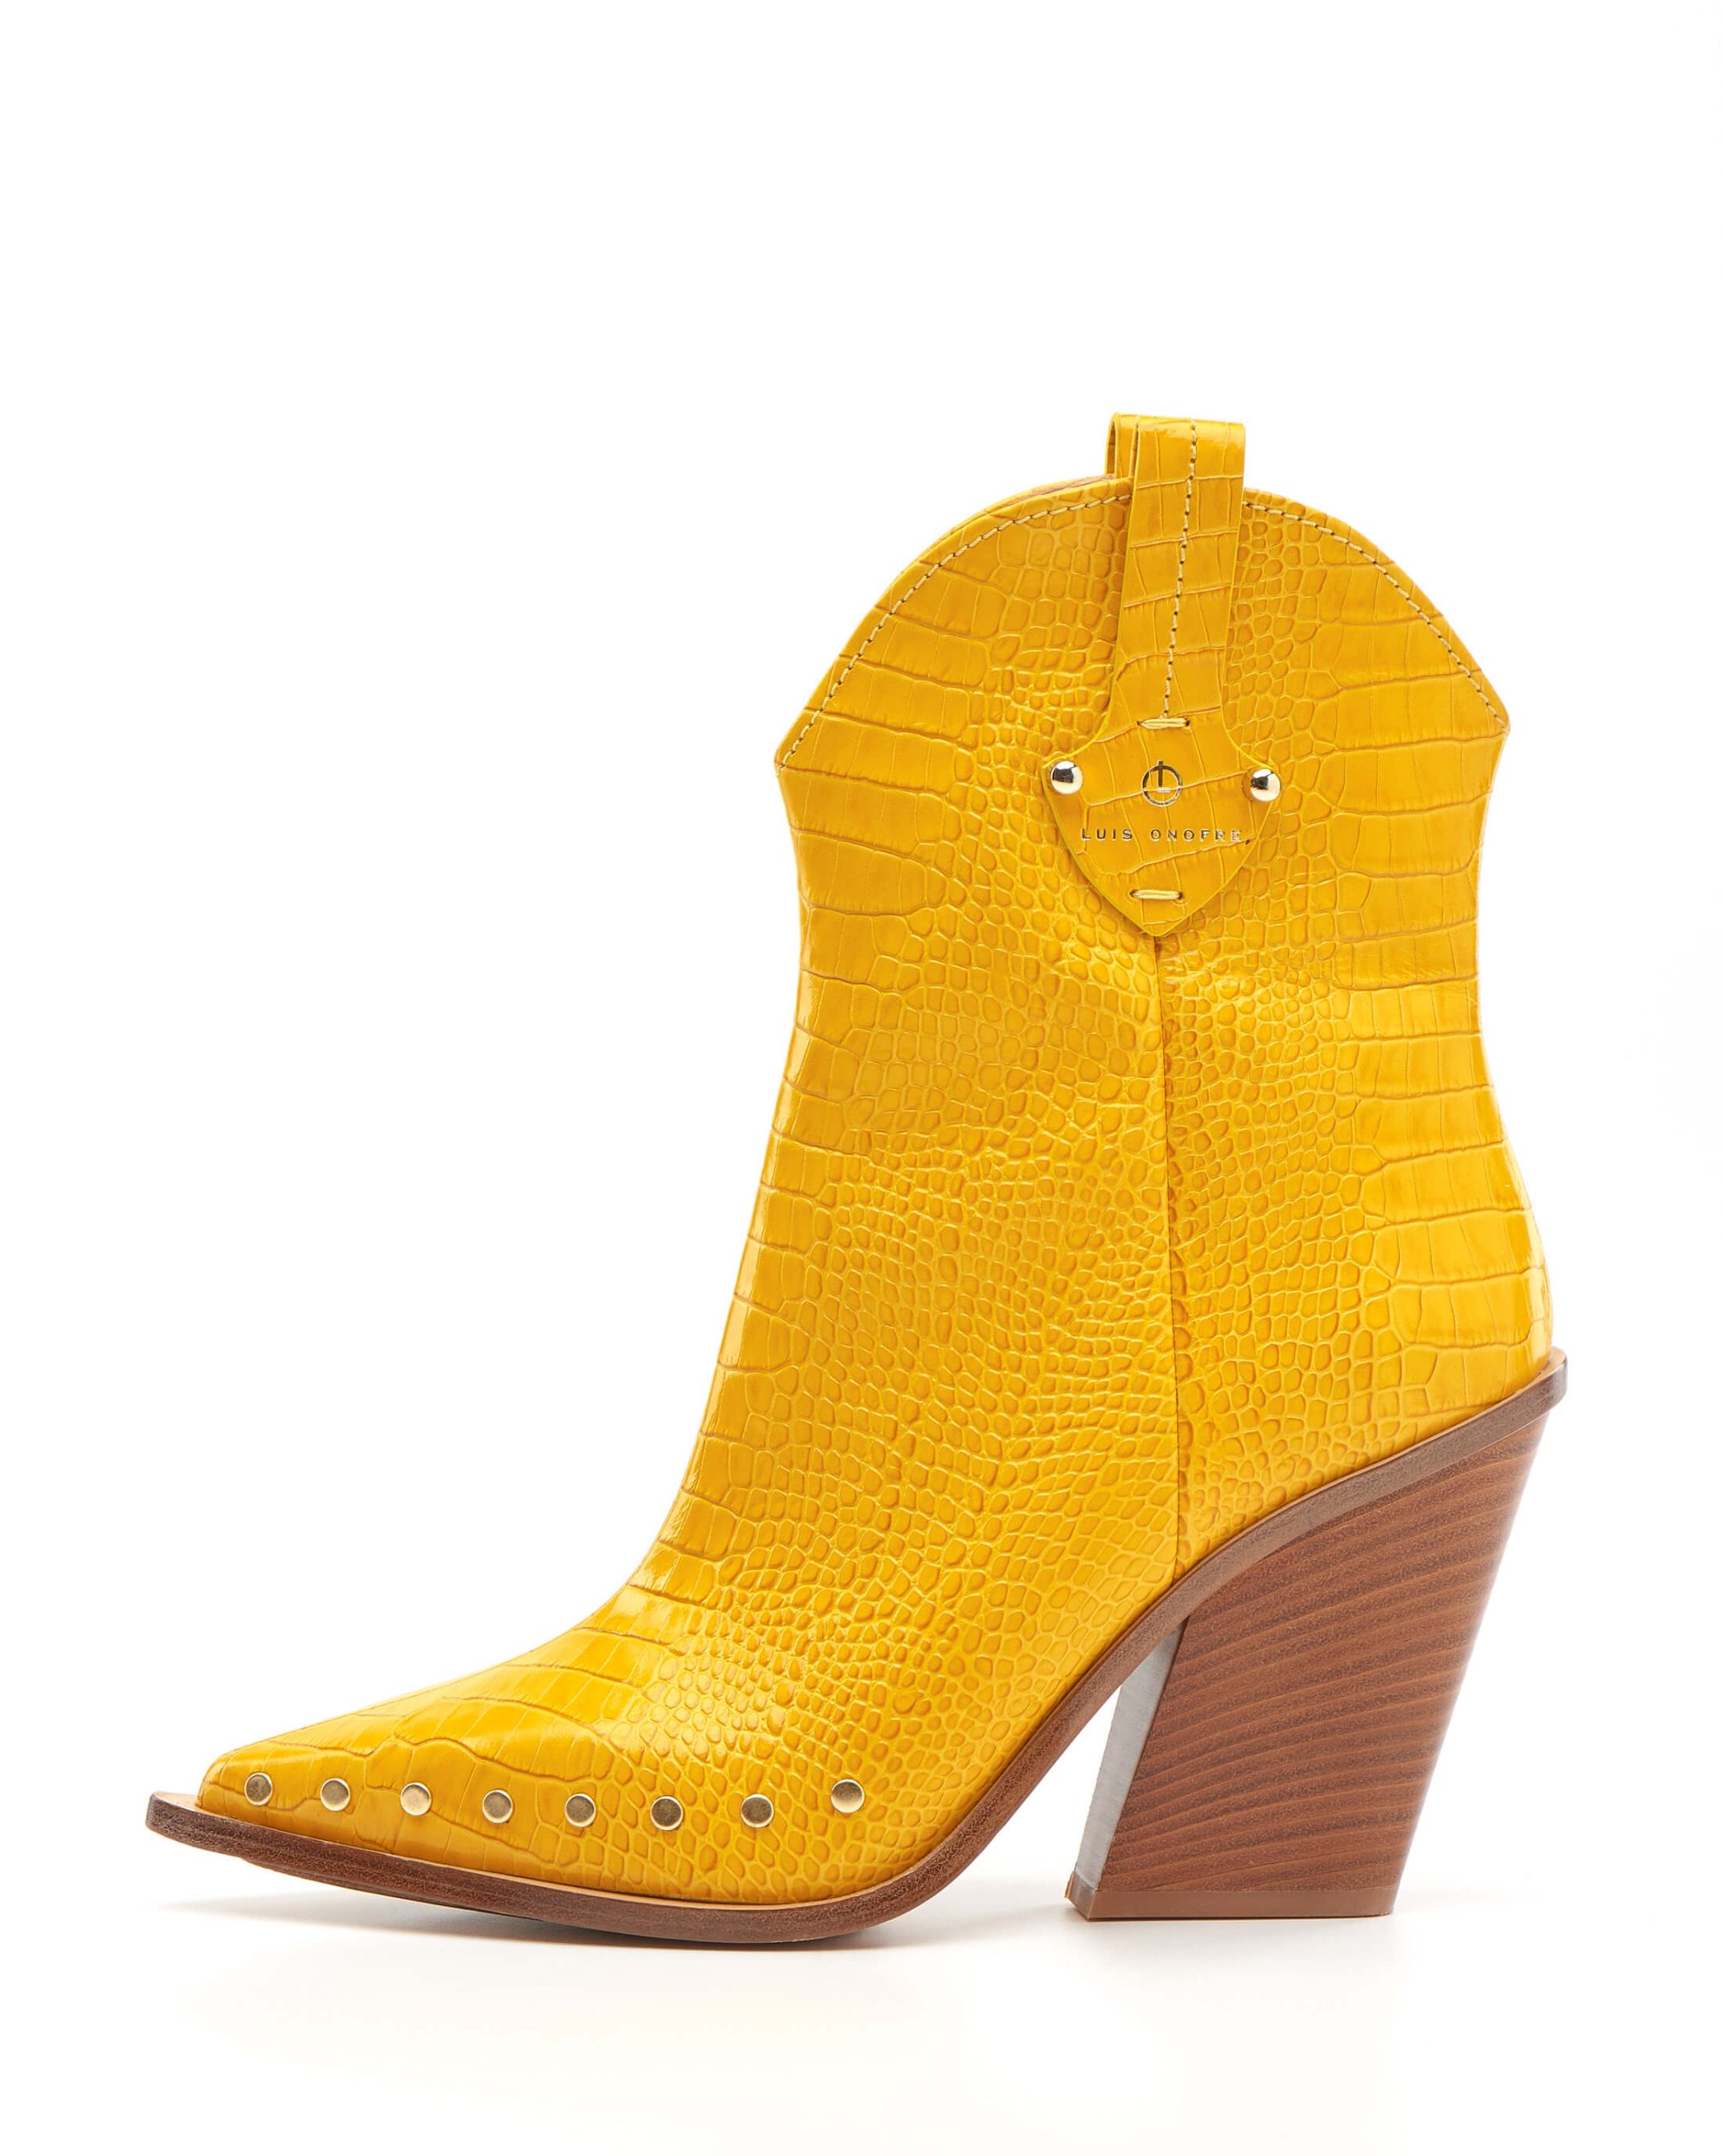 Luis Onofre Portuguese Shoes FW22 – 5257_06 – Fates Yellow